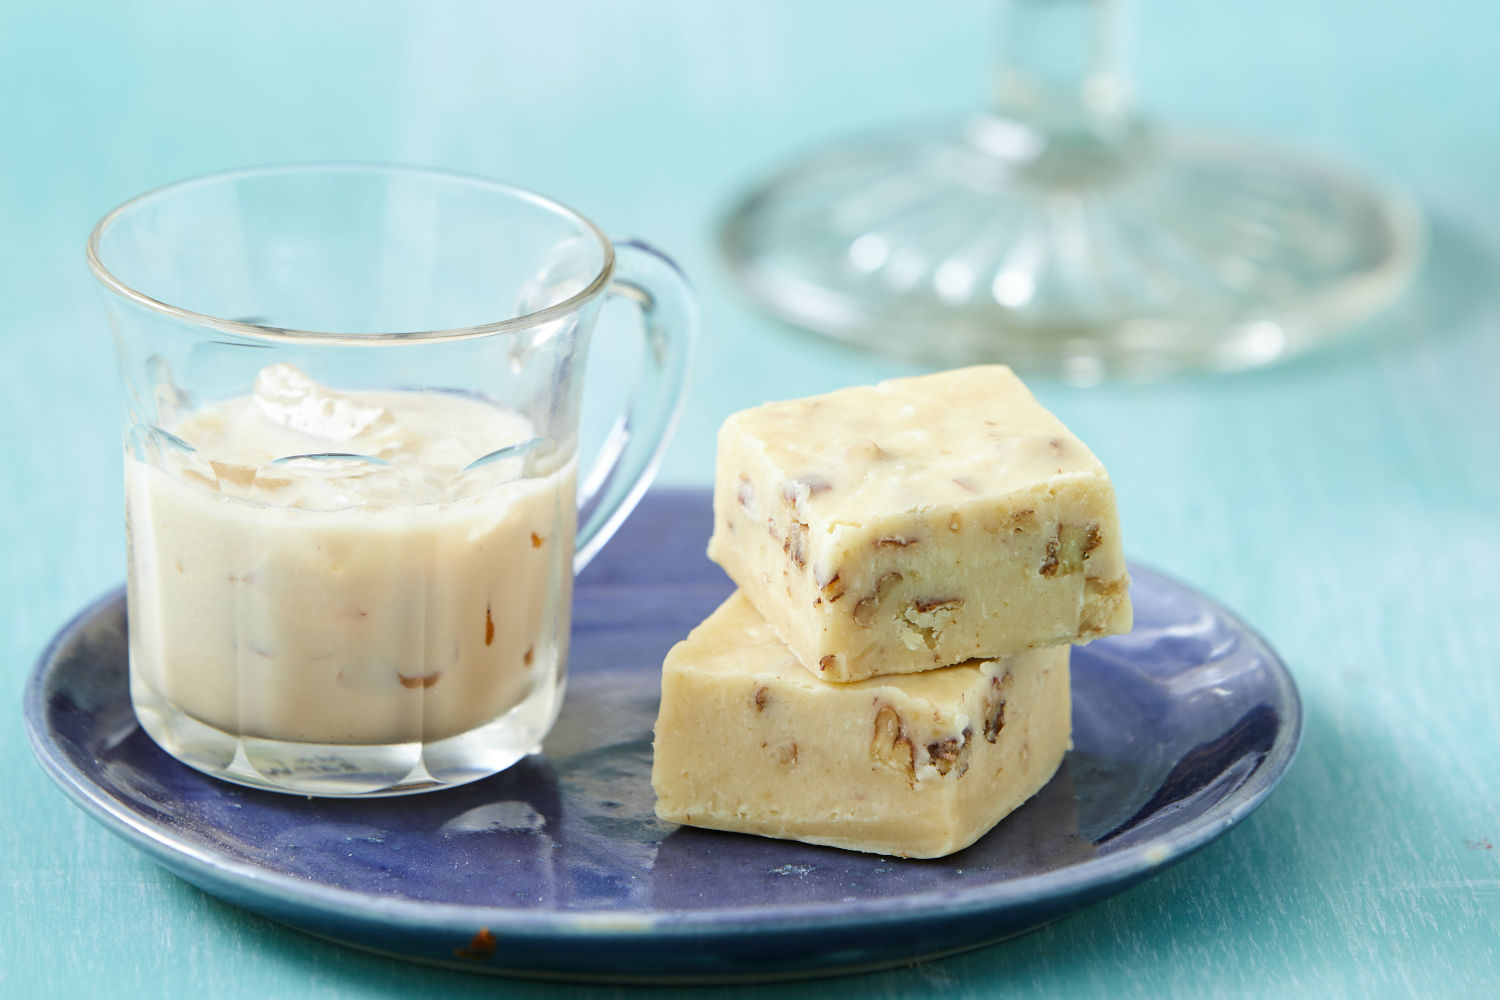 This decadent Bailey’s fudge is the perfect adults-only treat